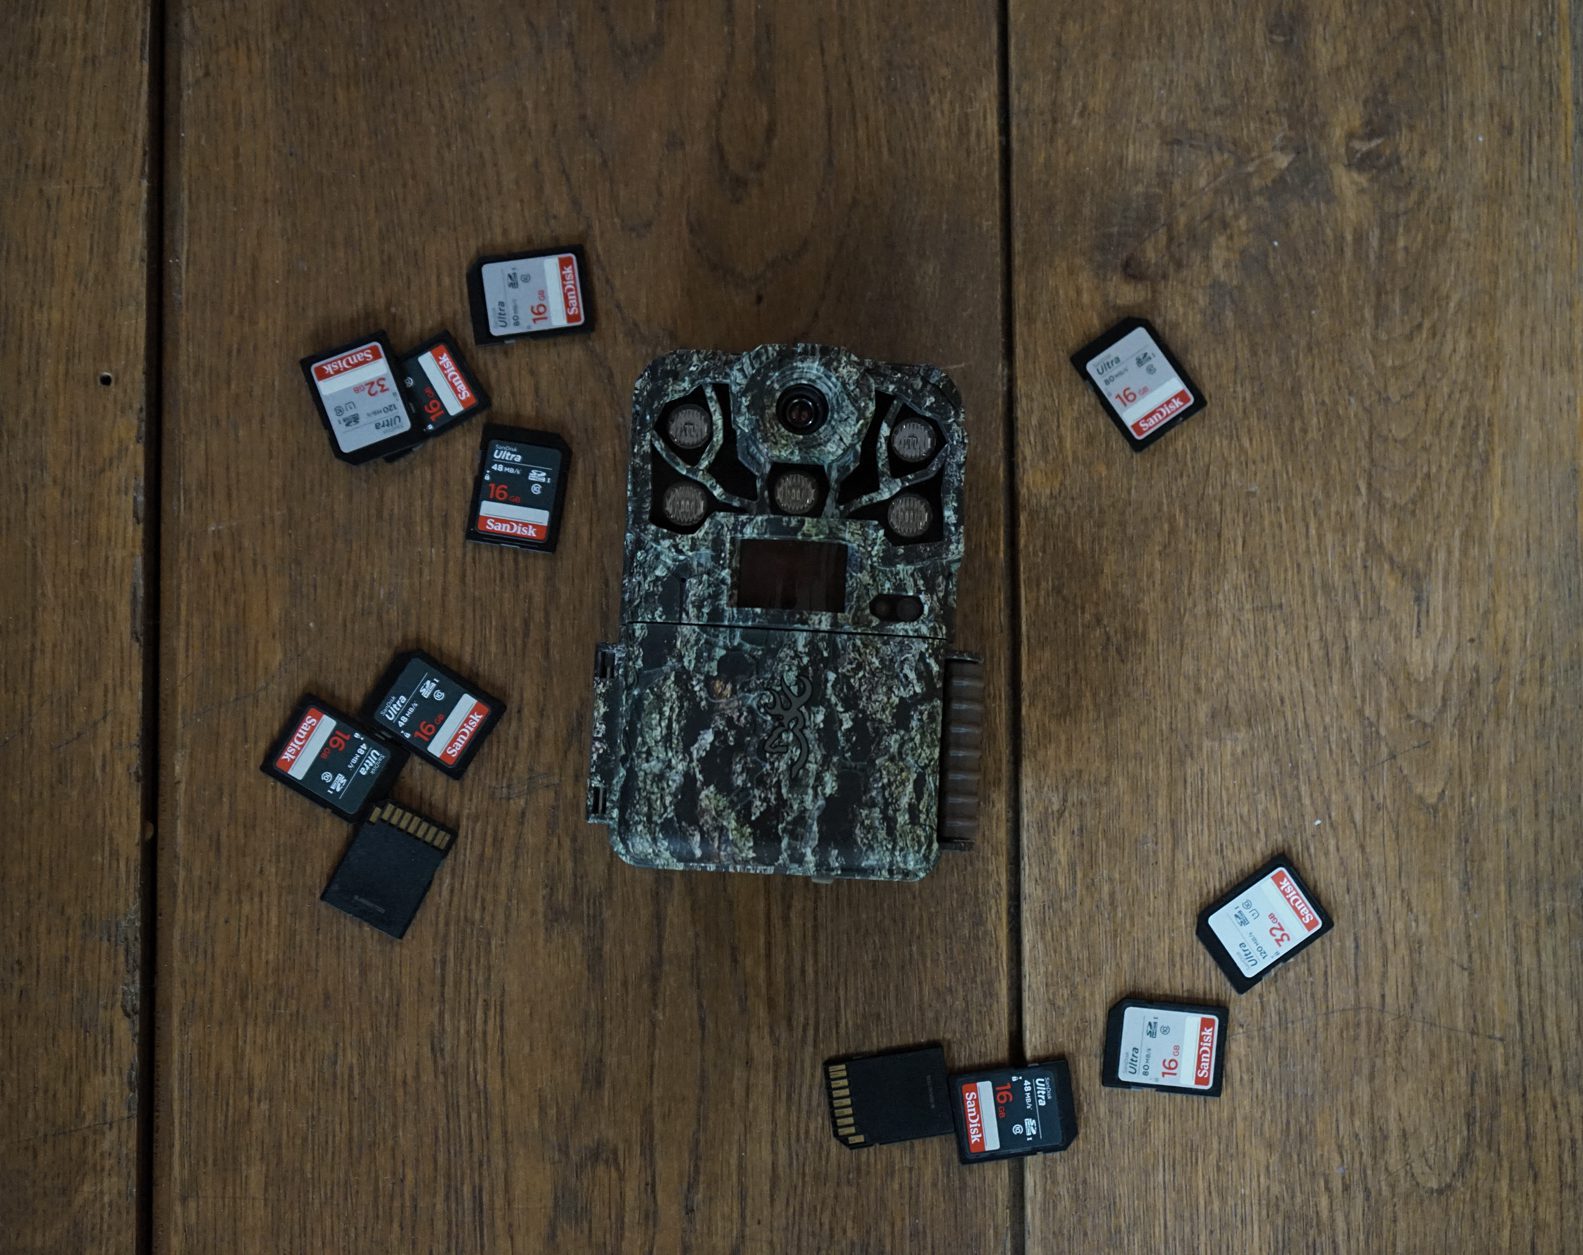 Trail camera surrounded by SD cards